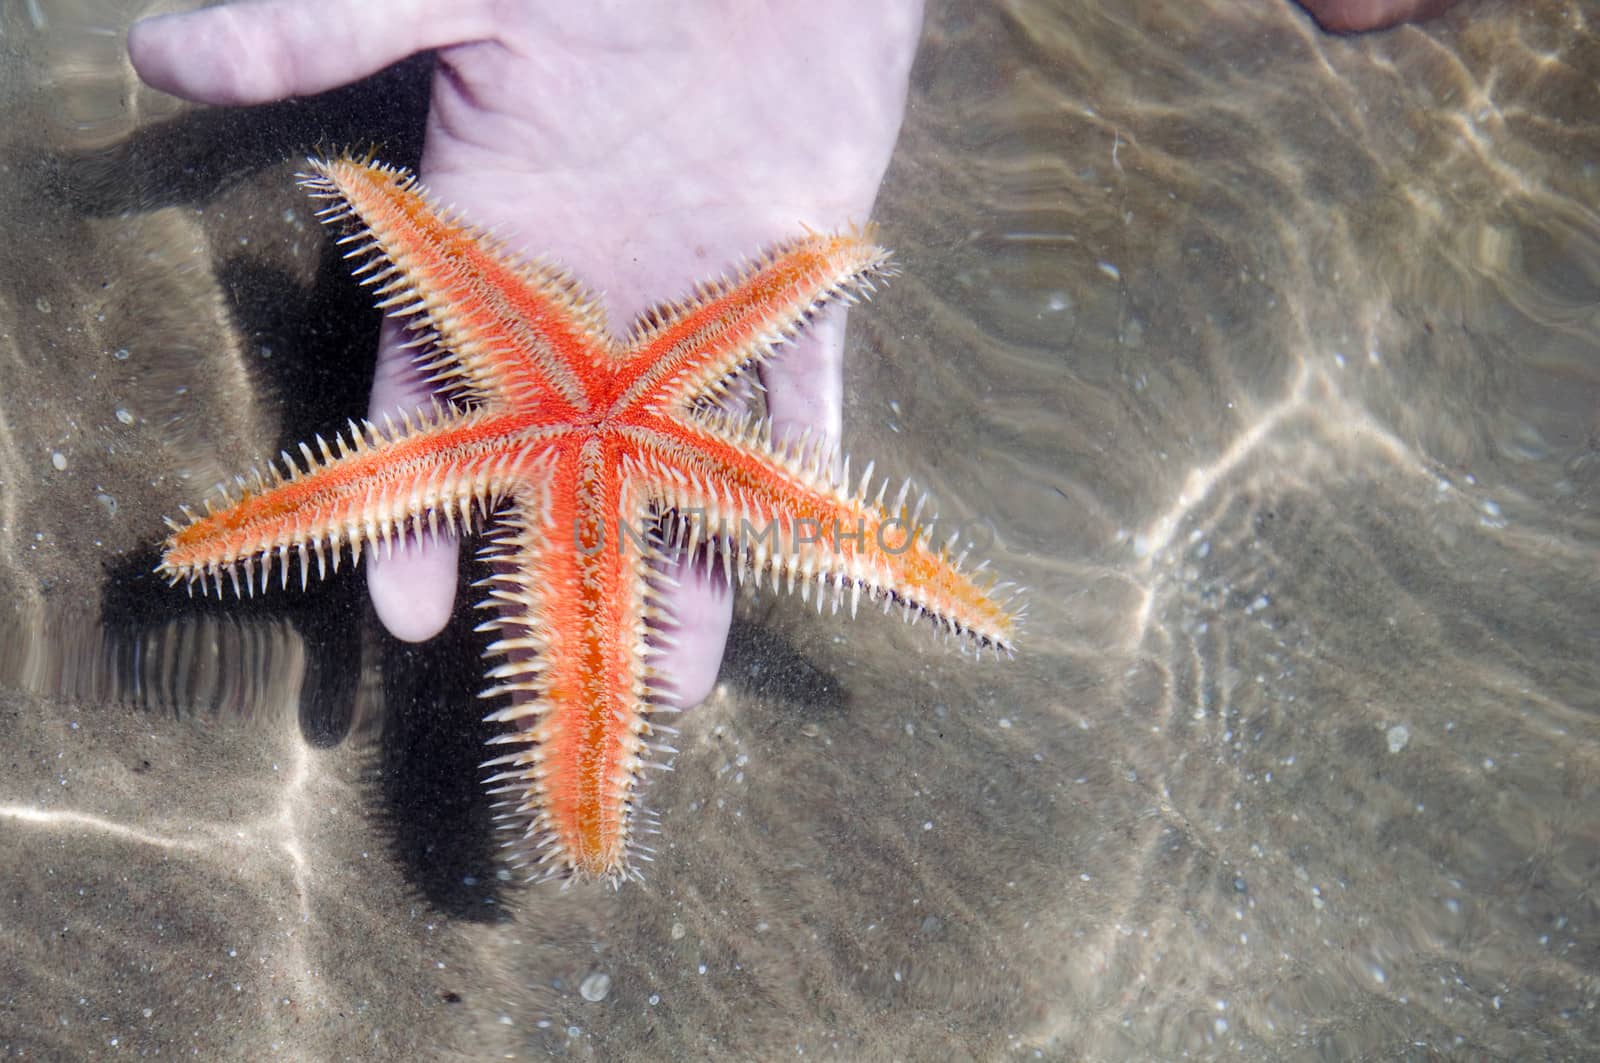 Starfish in the hand by jelen80